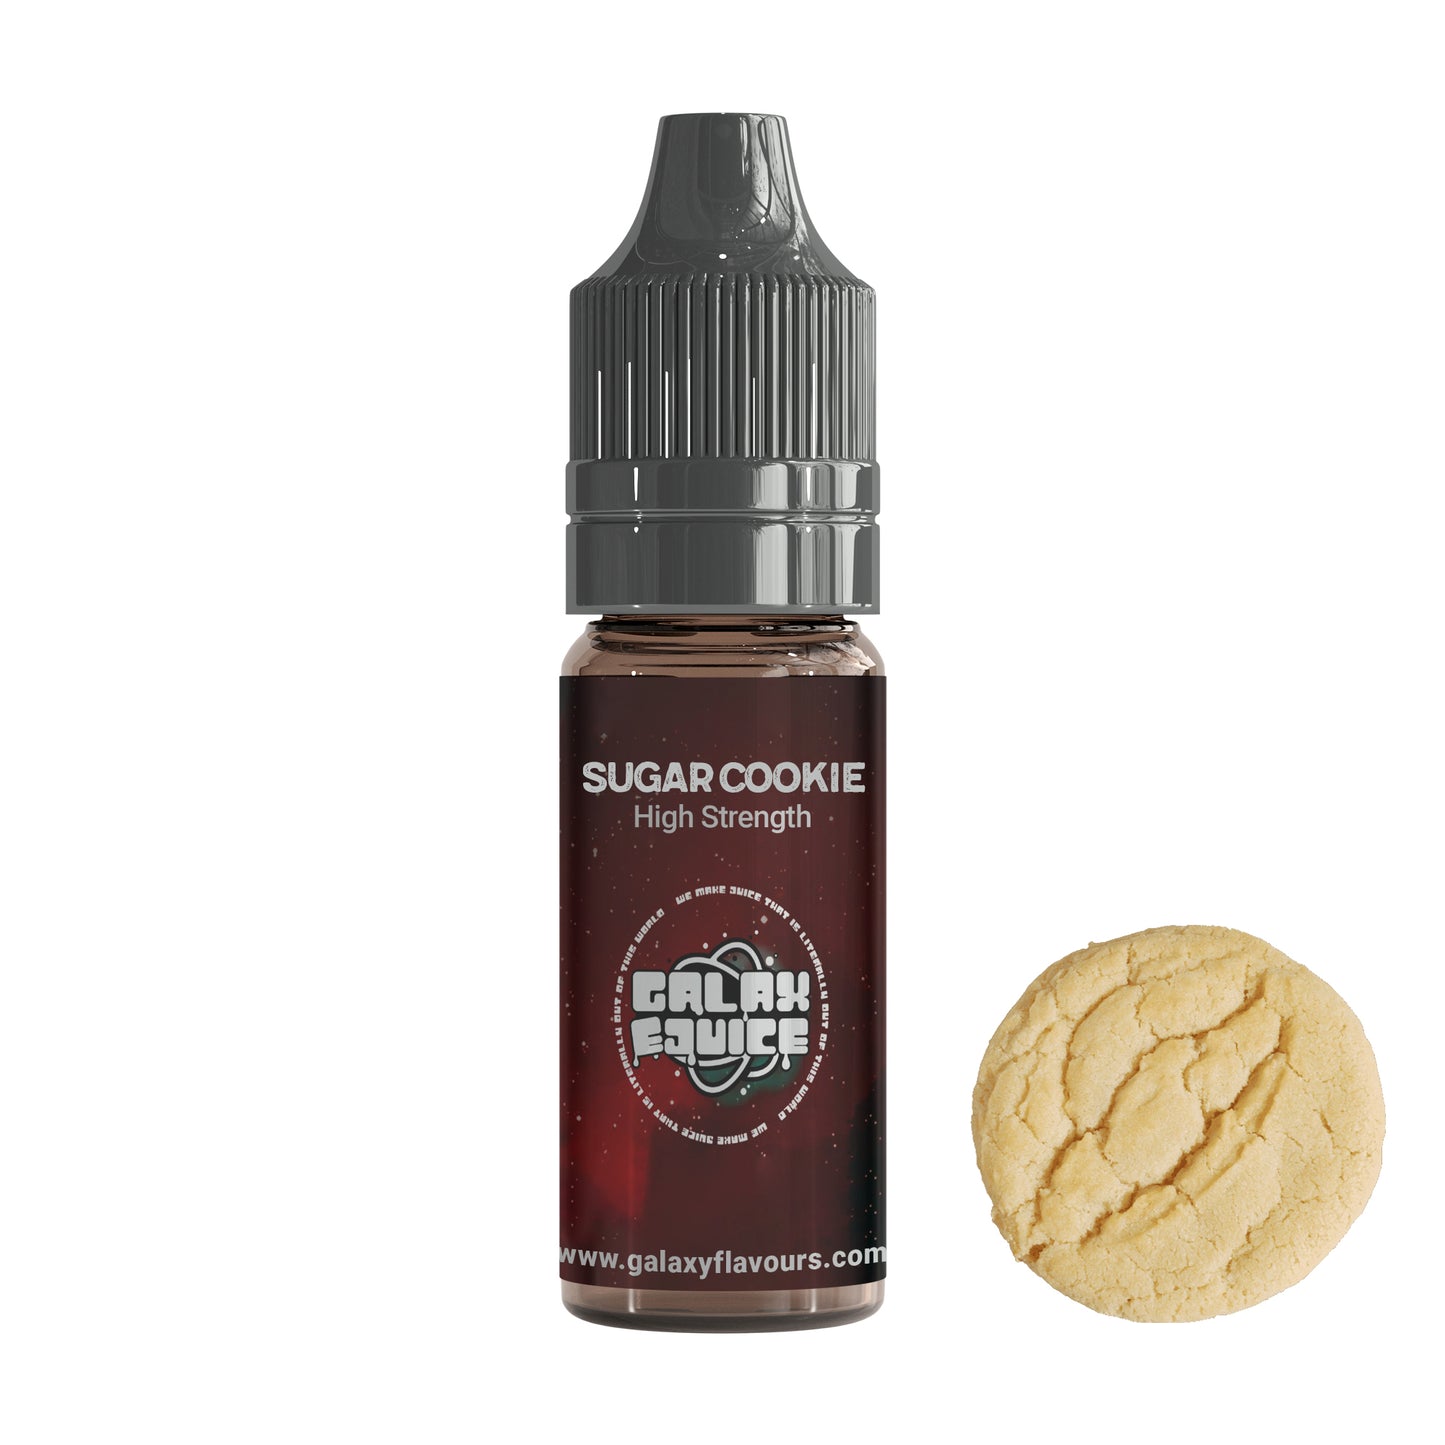 Sugar Cookie High Strength Professional Flavouring.